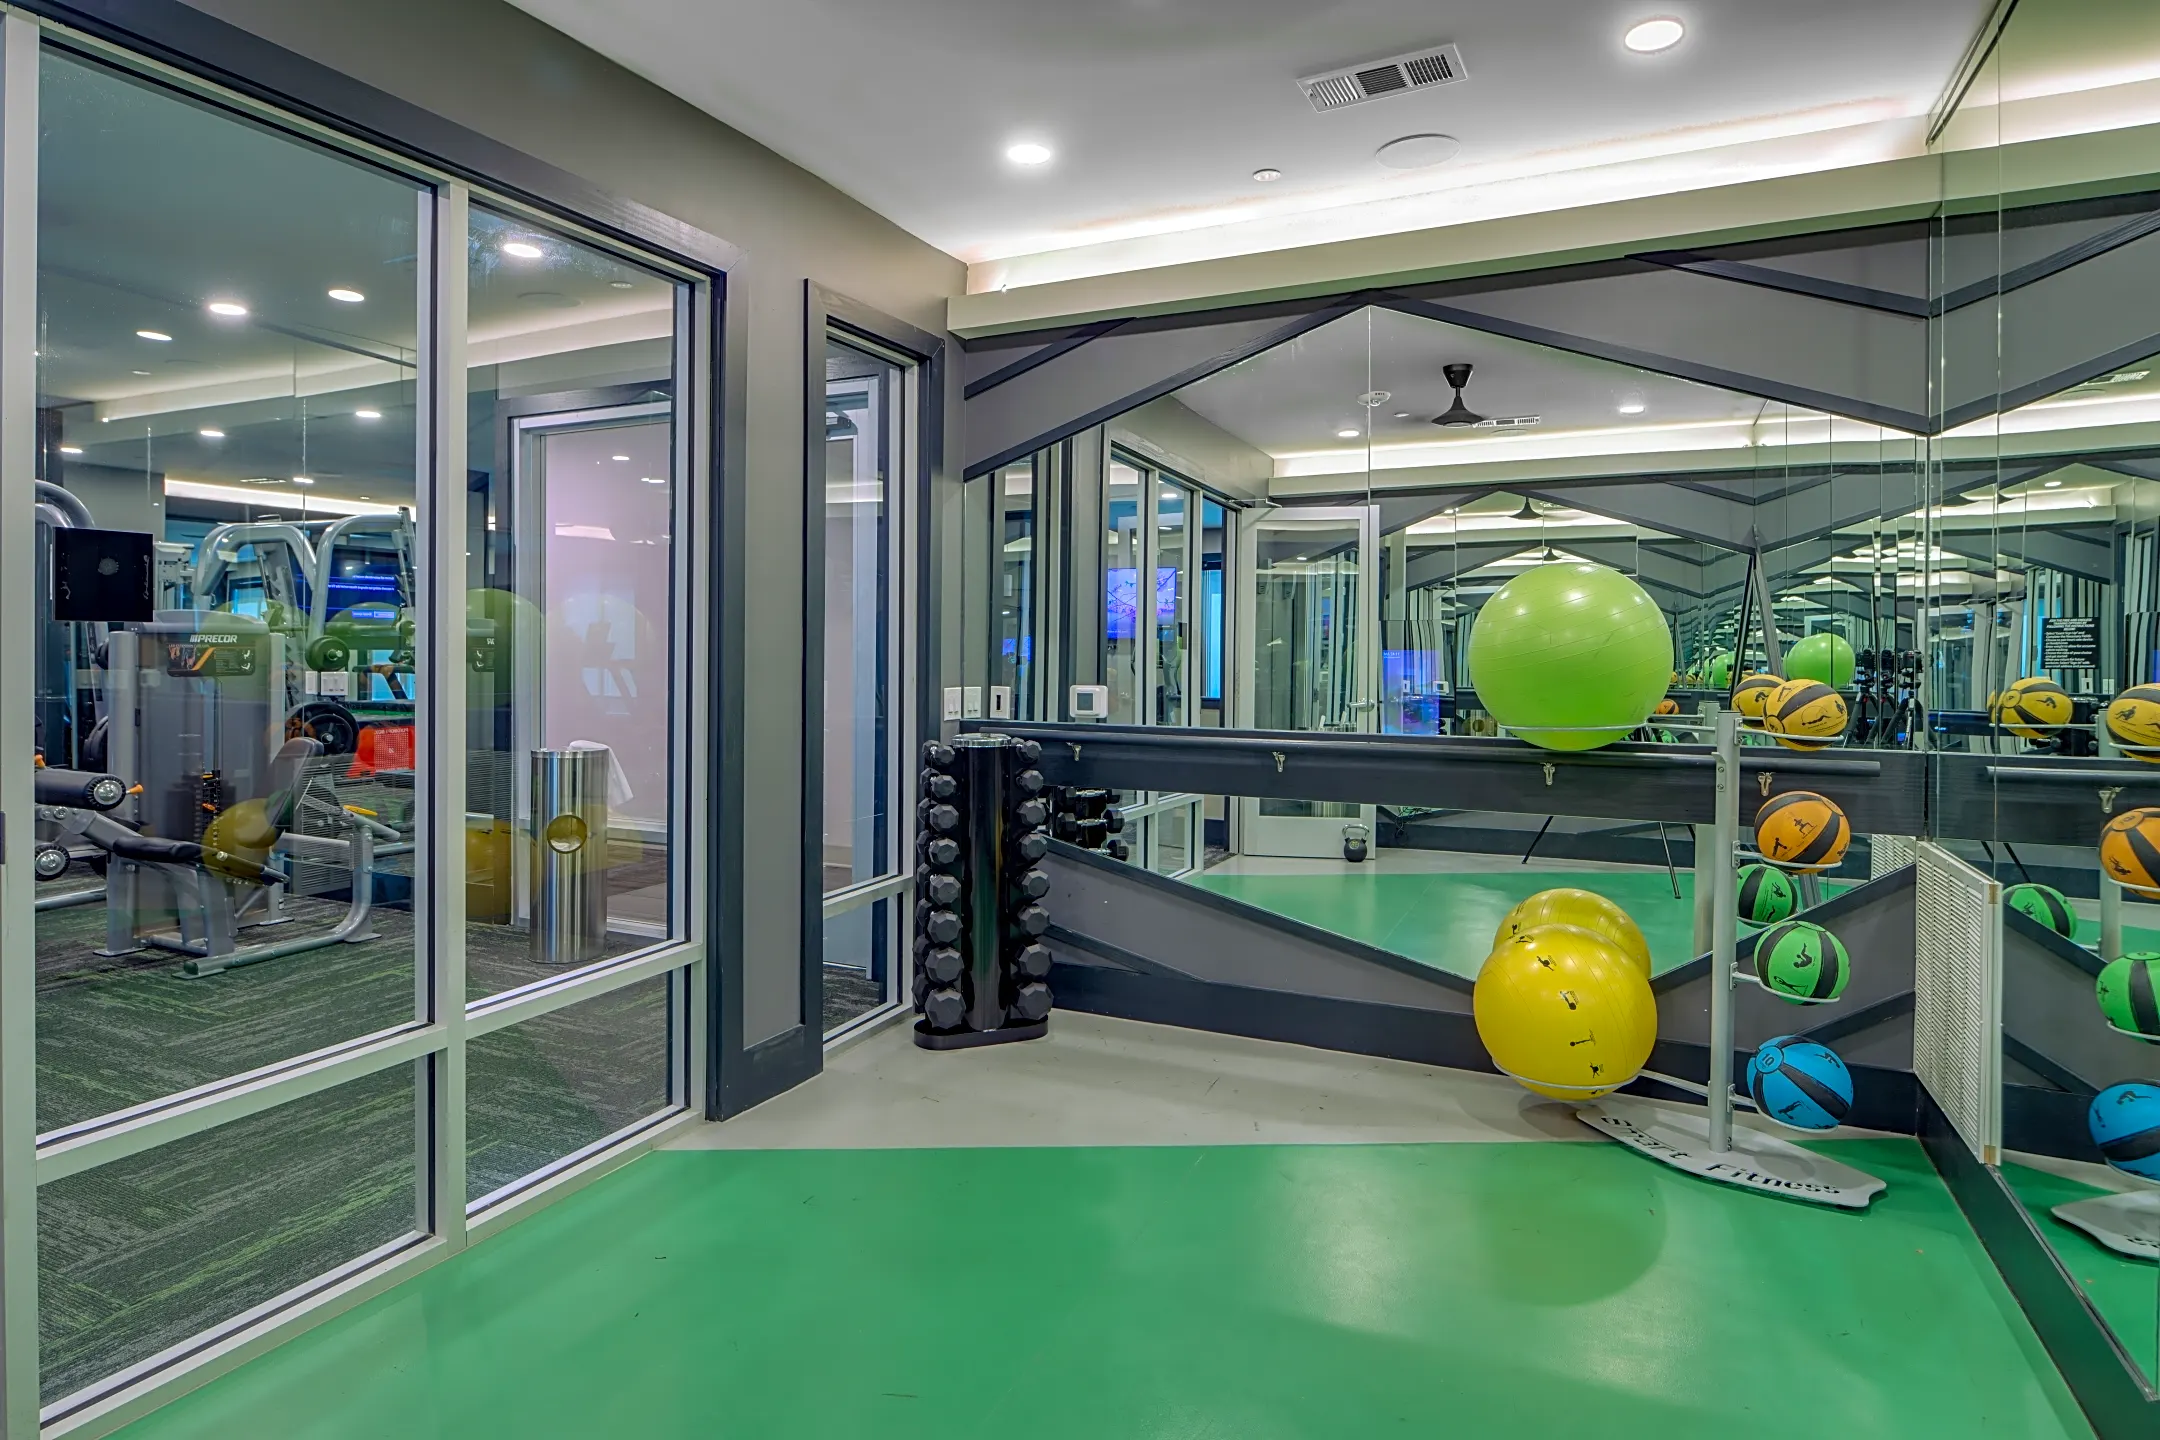 Fitness Weight Room - Luxia Midtown Park - Dallas, TX